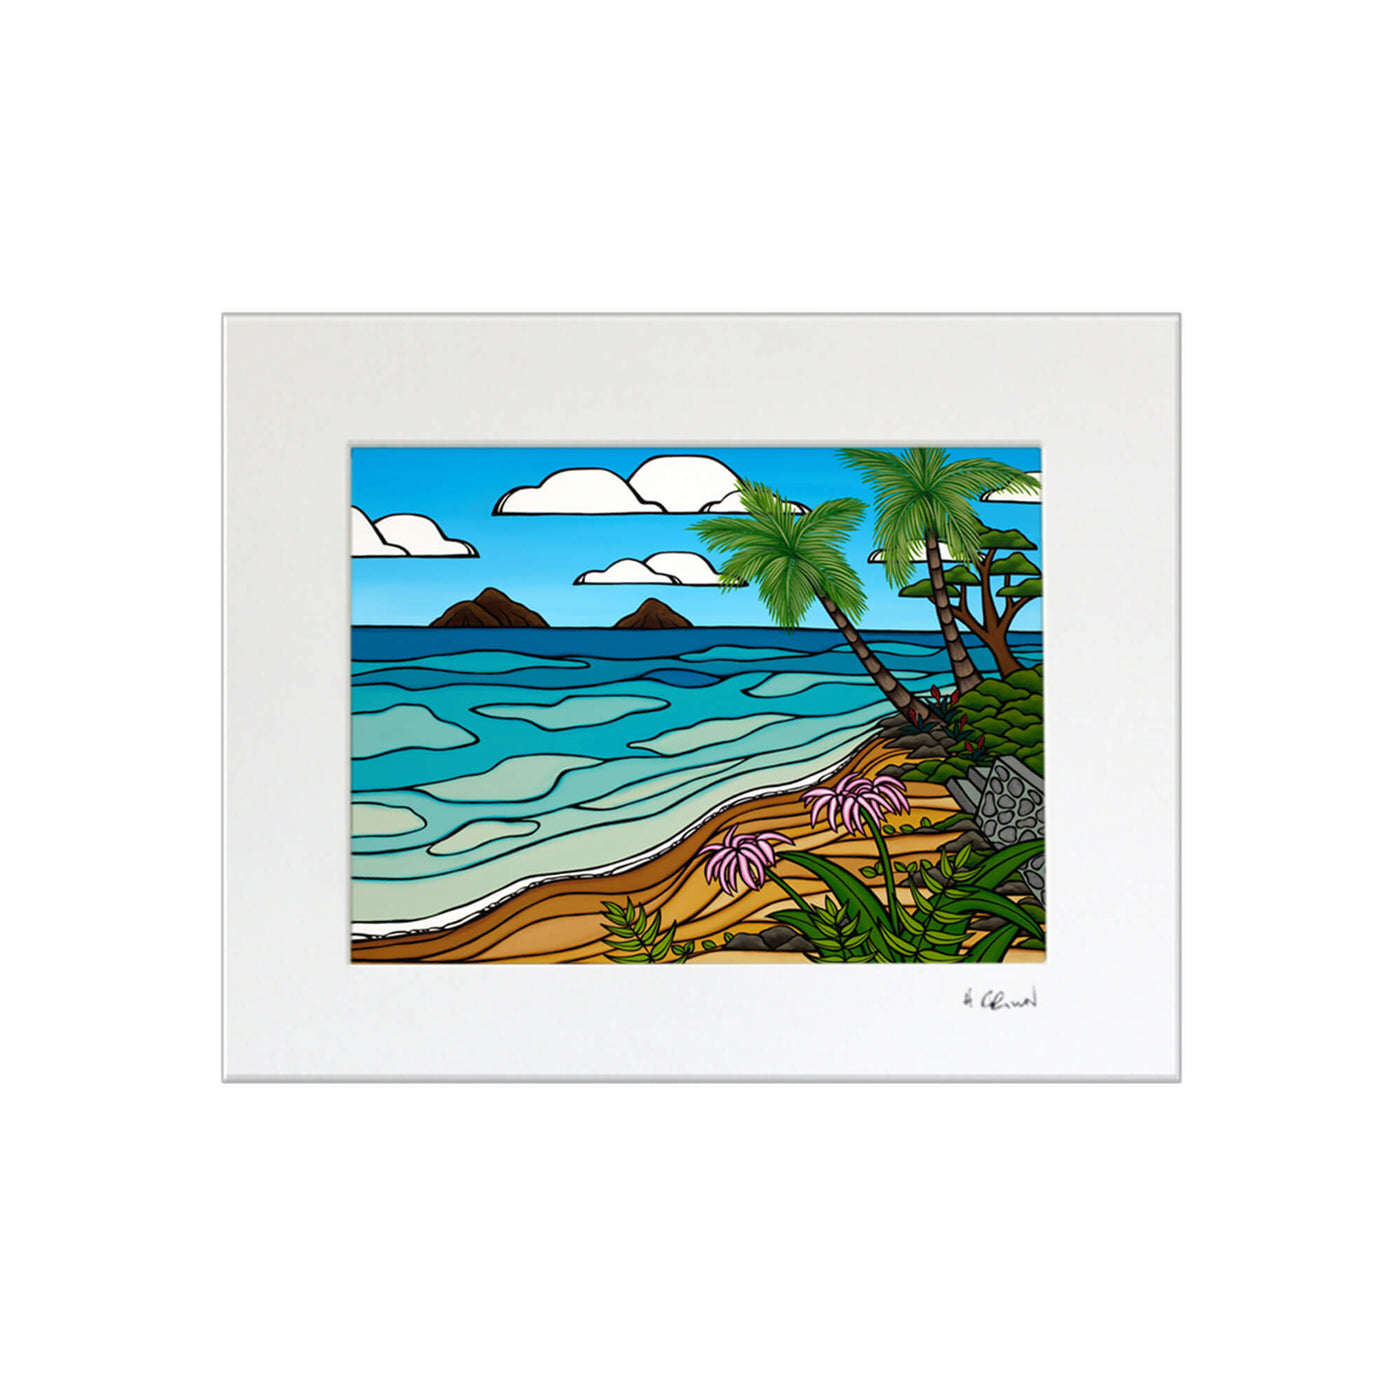 A matted art print of a vibrant colored seascape by Hawaii surf artist Heather Brown